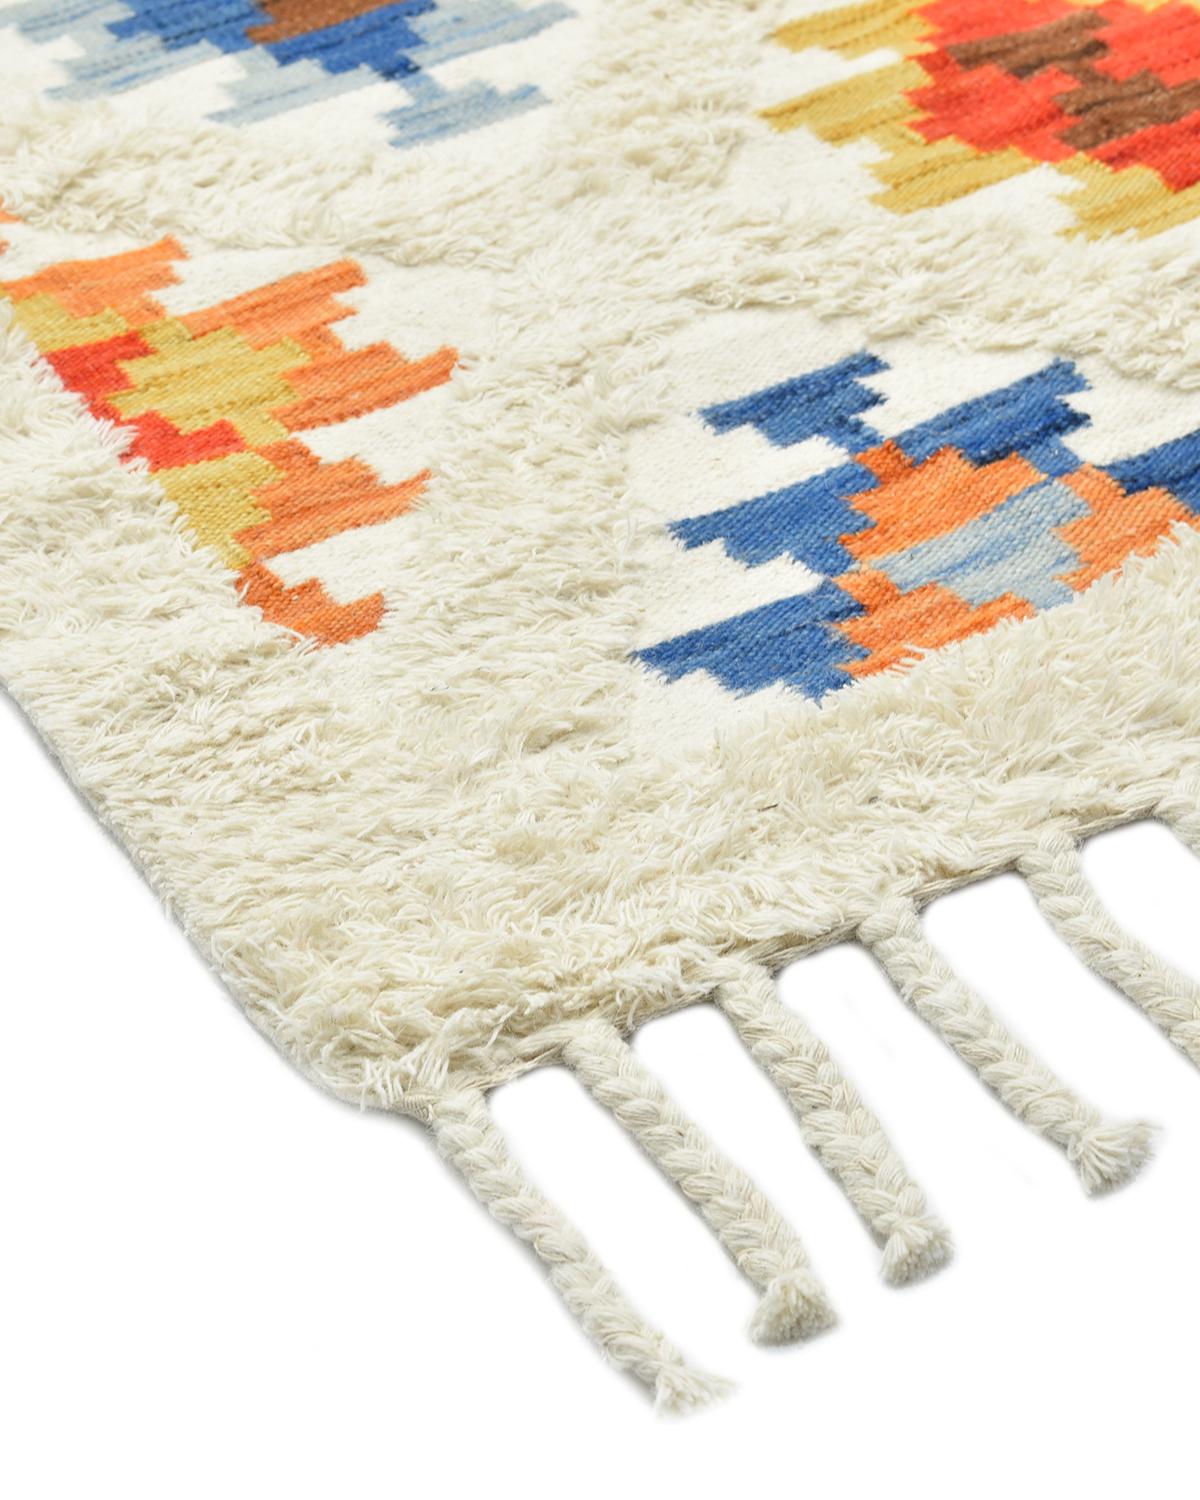 Moroccan rugs such as Beni Ourains and zboucherouites are highly prized for their plush pile that makes walking barefoot a delight. Hand-knotted of sumptuous wool with designs inspired by centuries-old tribal motifs, the Shaggy Moroccan collection